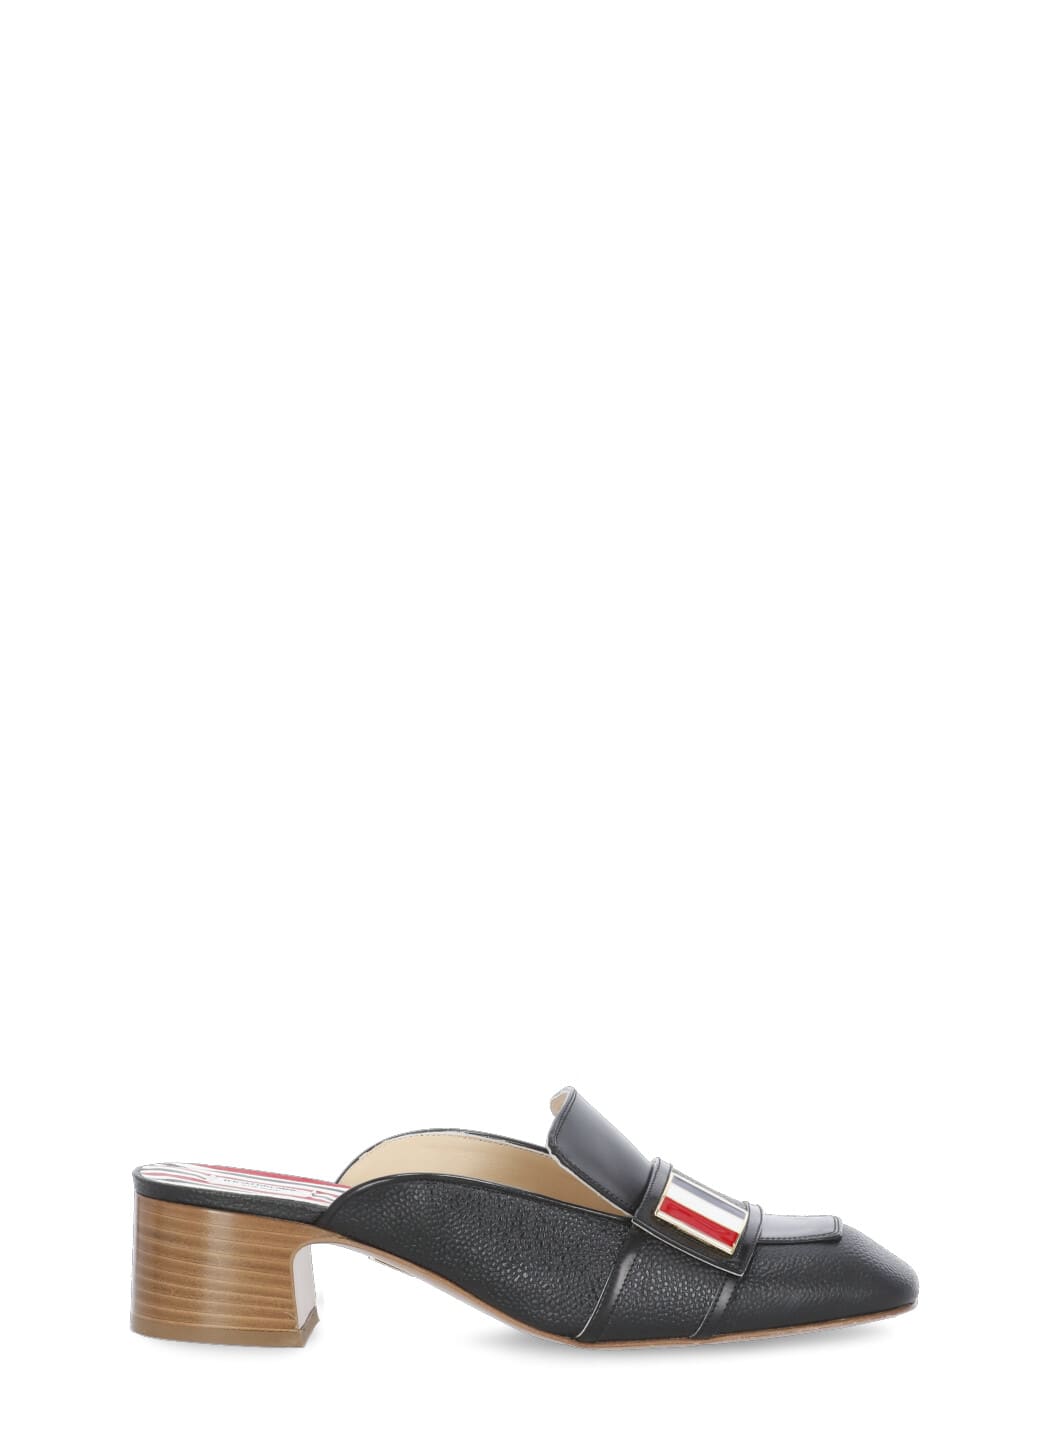 Thom Browne Chic Loafers